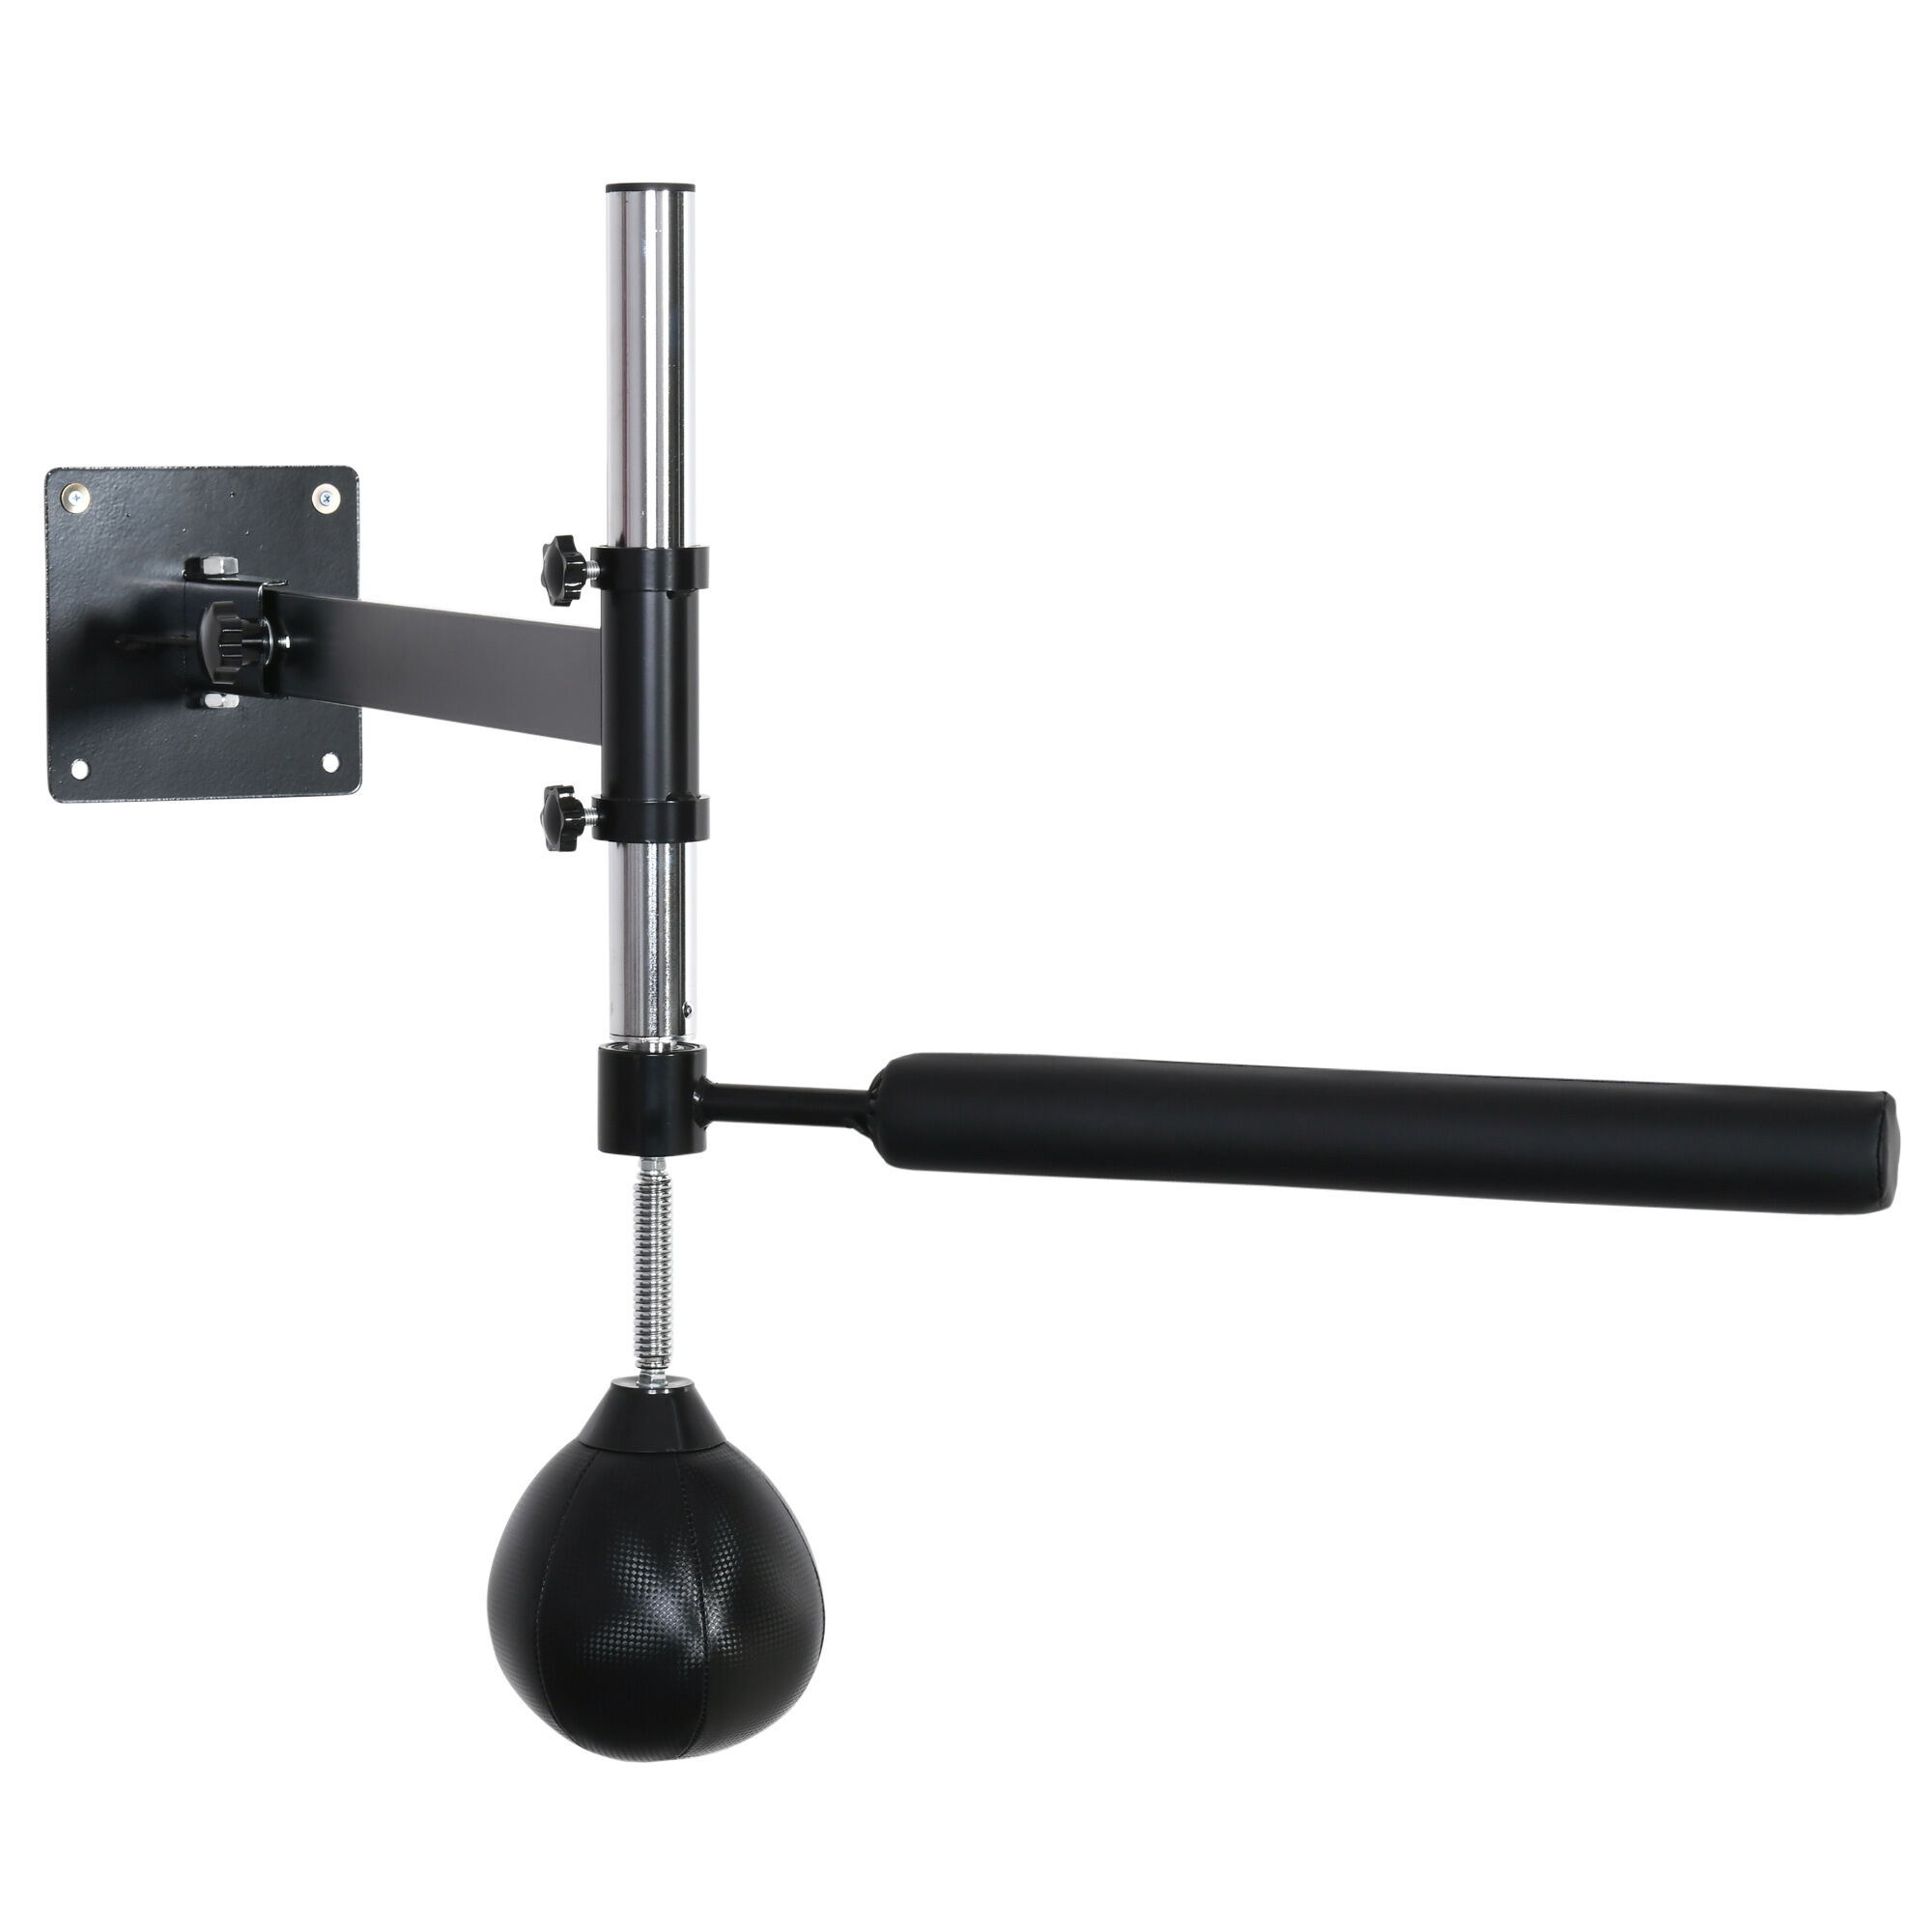 Soozier Wall Mount Reflex Boxing Trainer with 360° Rotating Rapid Boxing Bar Punching Ball Black   Aosom.com Home Gym Equipment